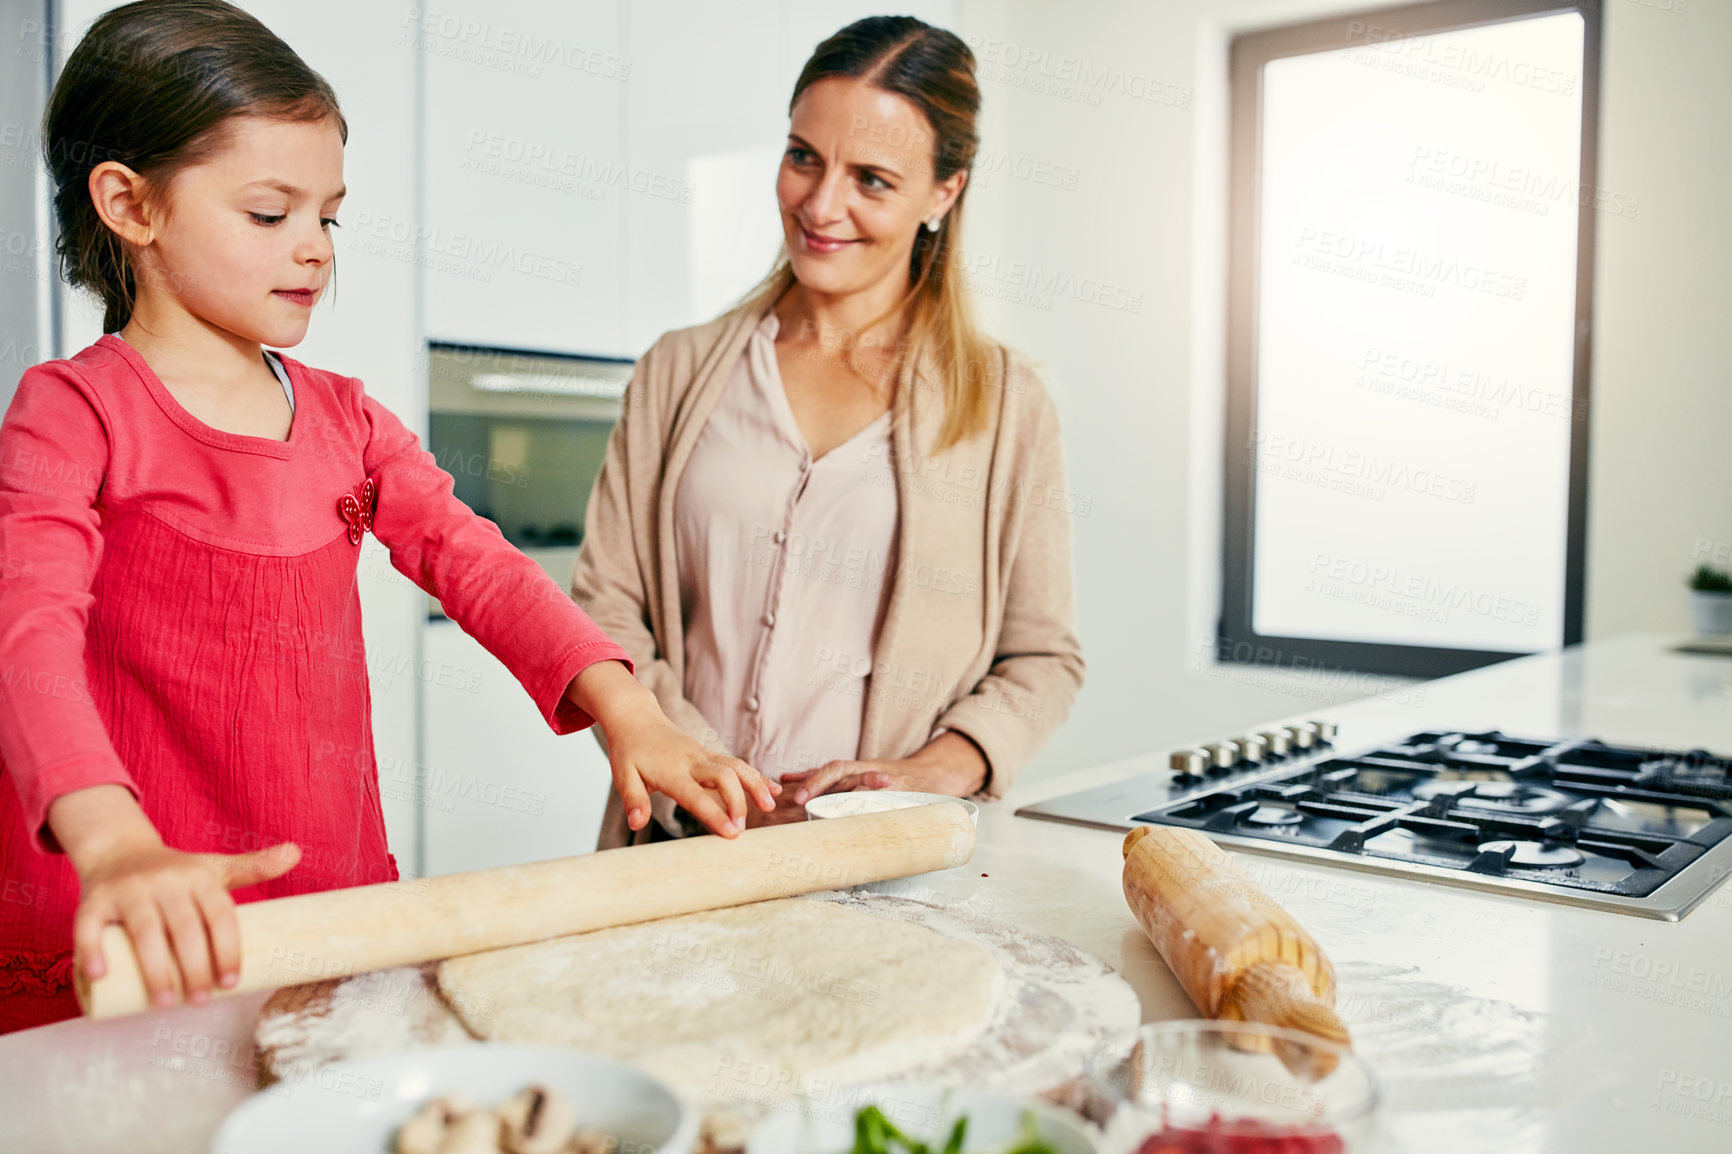 Buy stock photo Shot of a middle aged mother and her daughter preparing a pizza to go into the oven in the kitchen at home